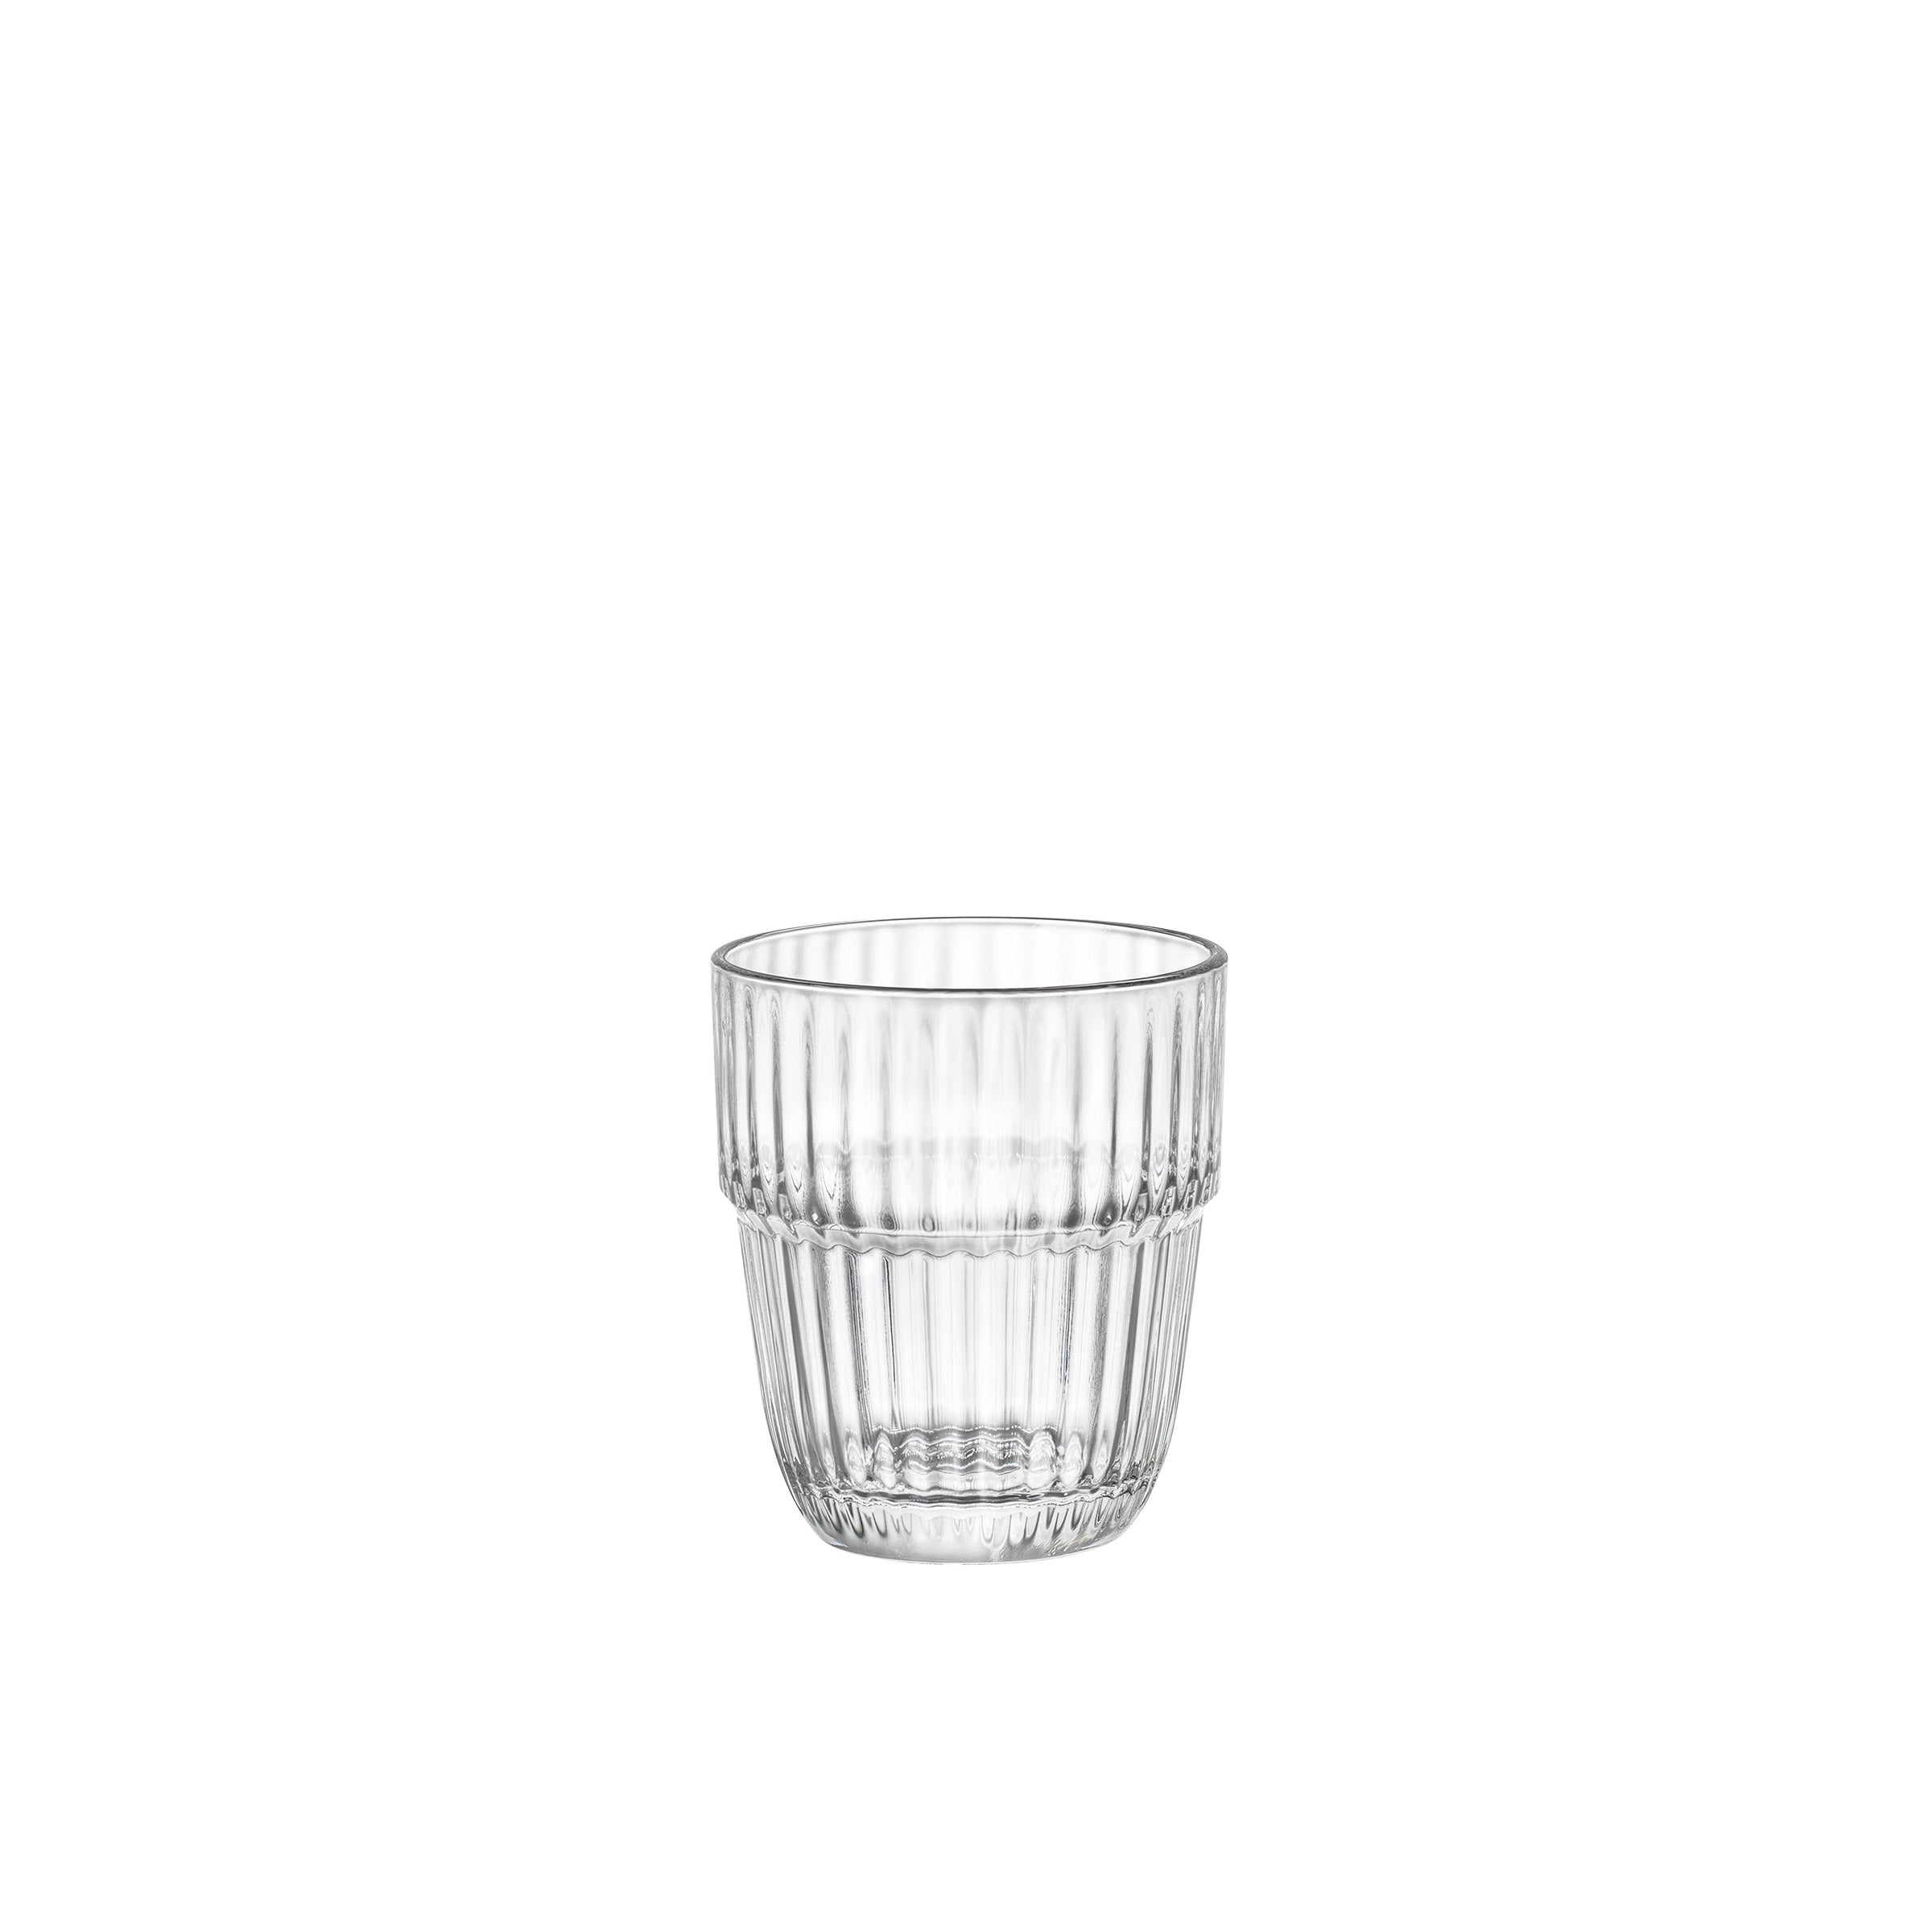 Mustache Pint Glasses - Set of 6 — Bar Products